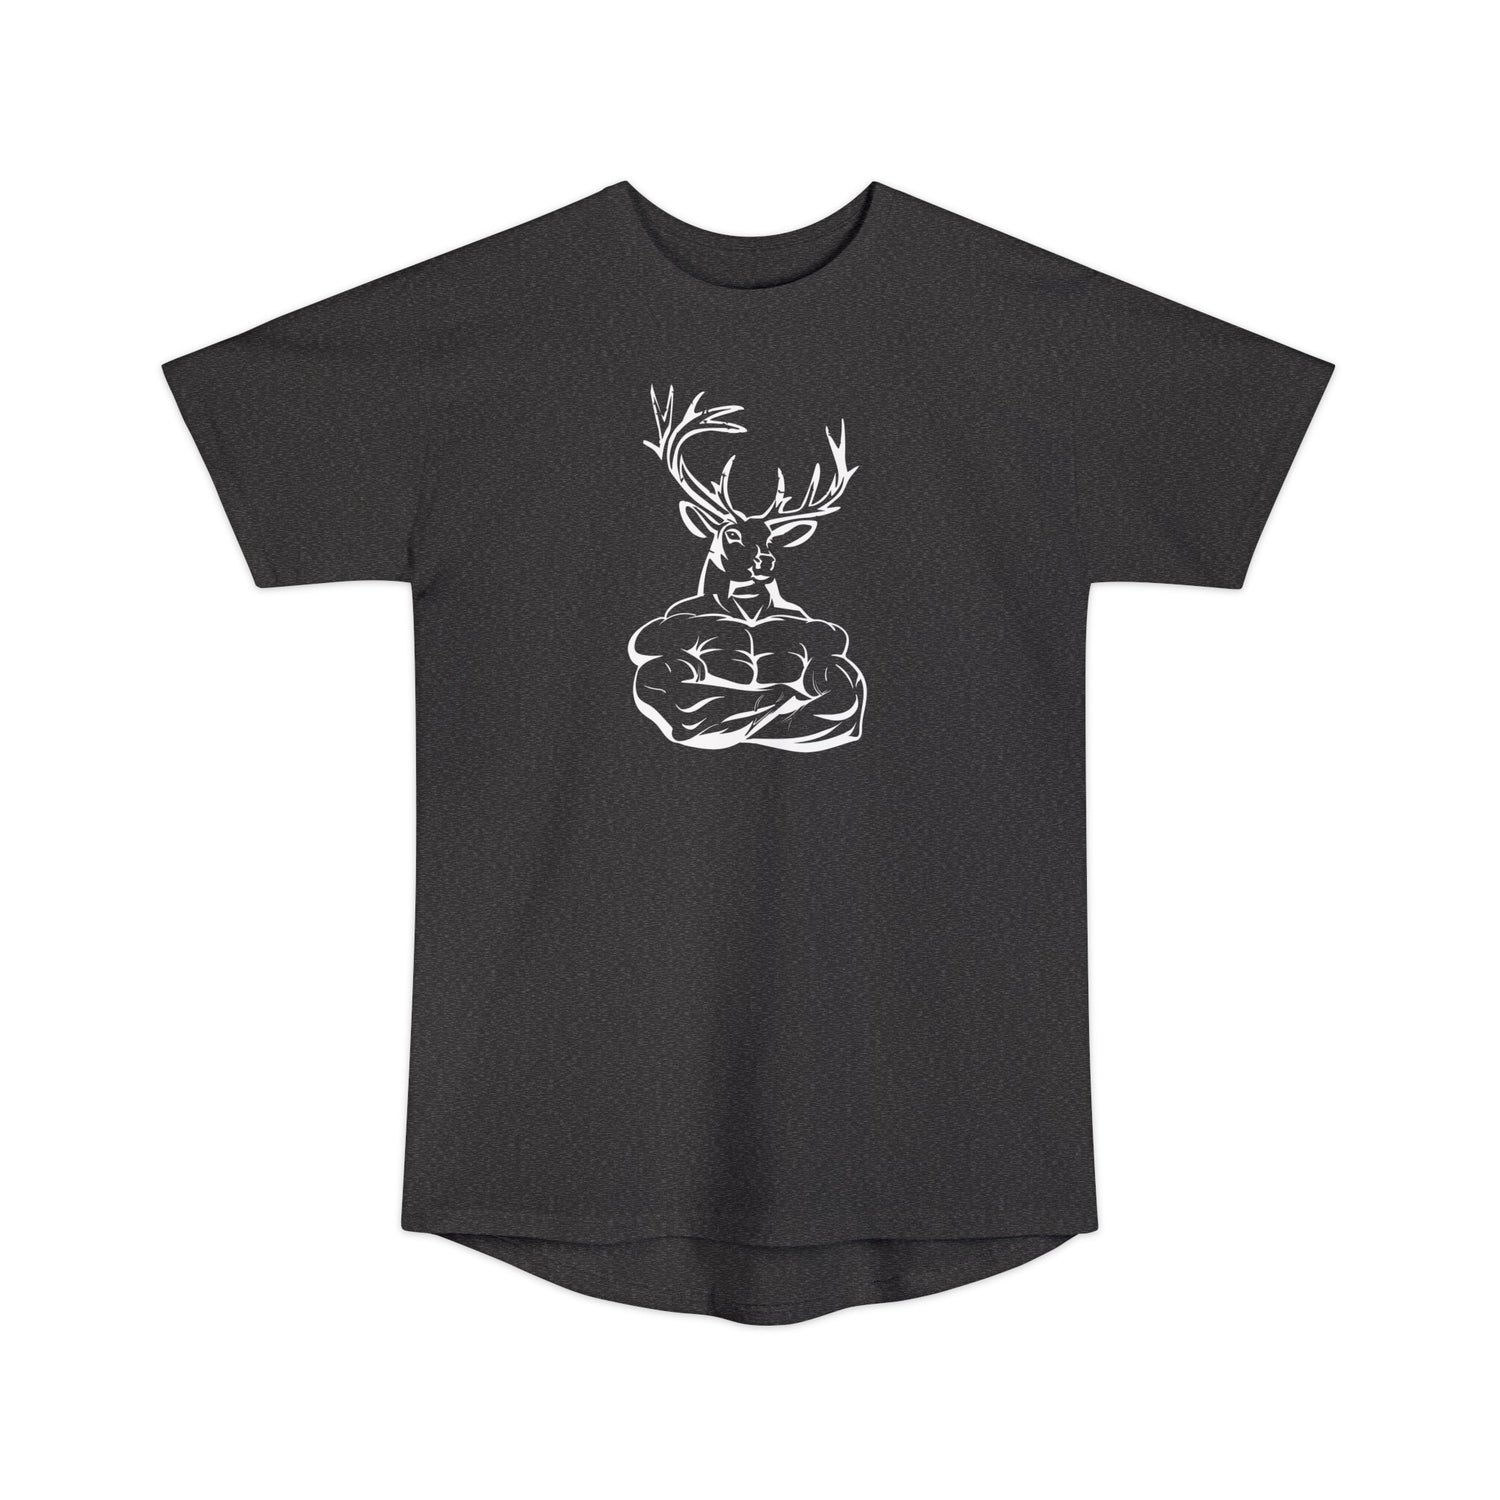 Athletic tall deer hunting t-shirt, color dark grey, front design placement